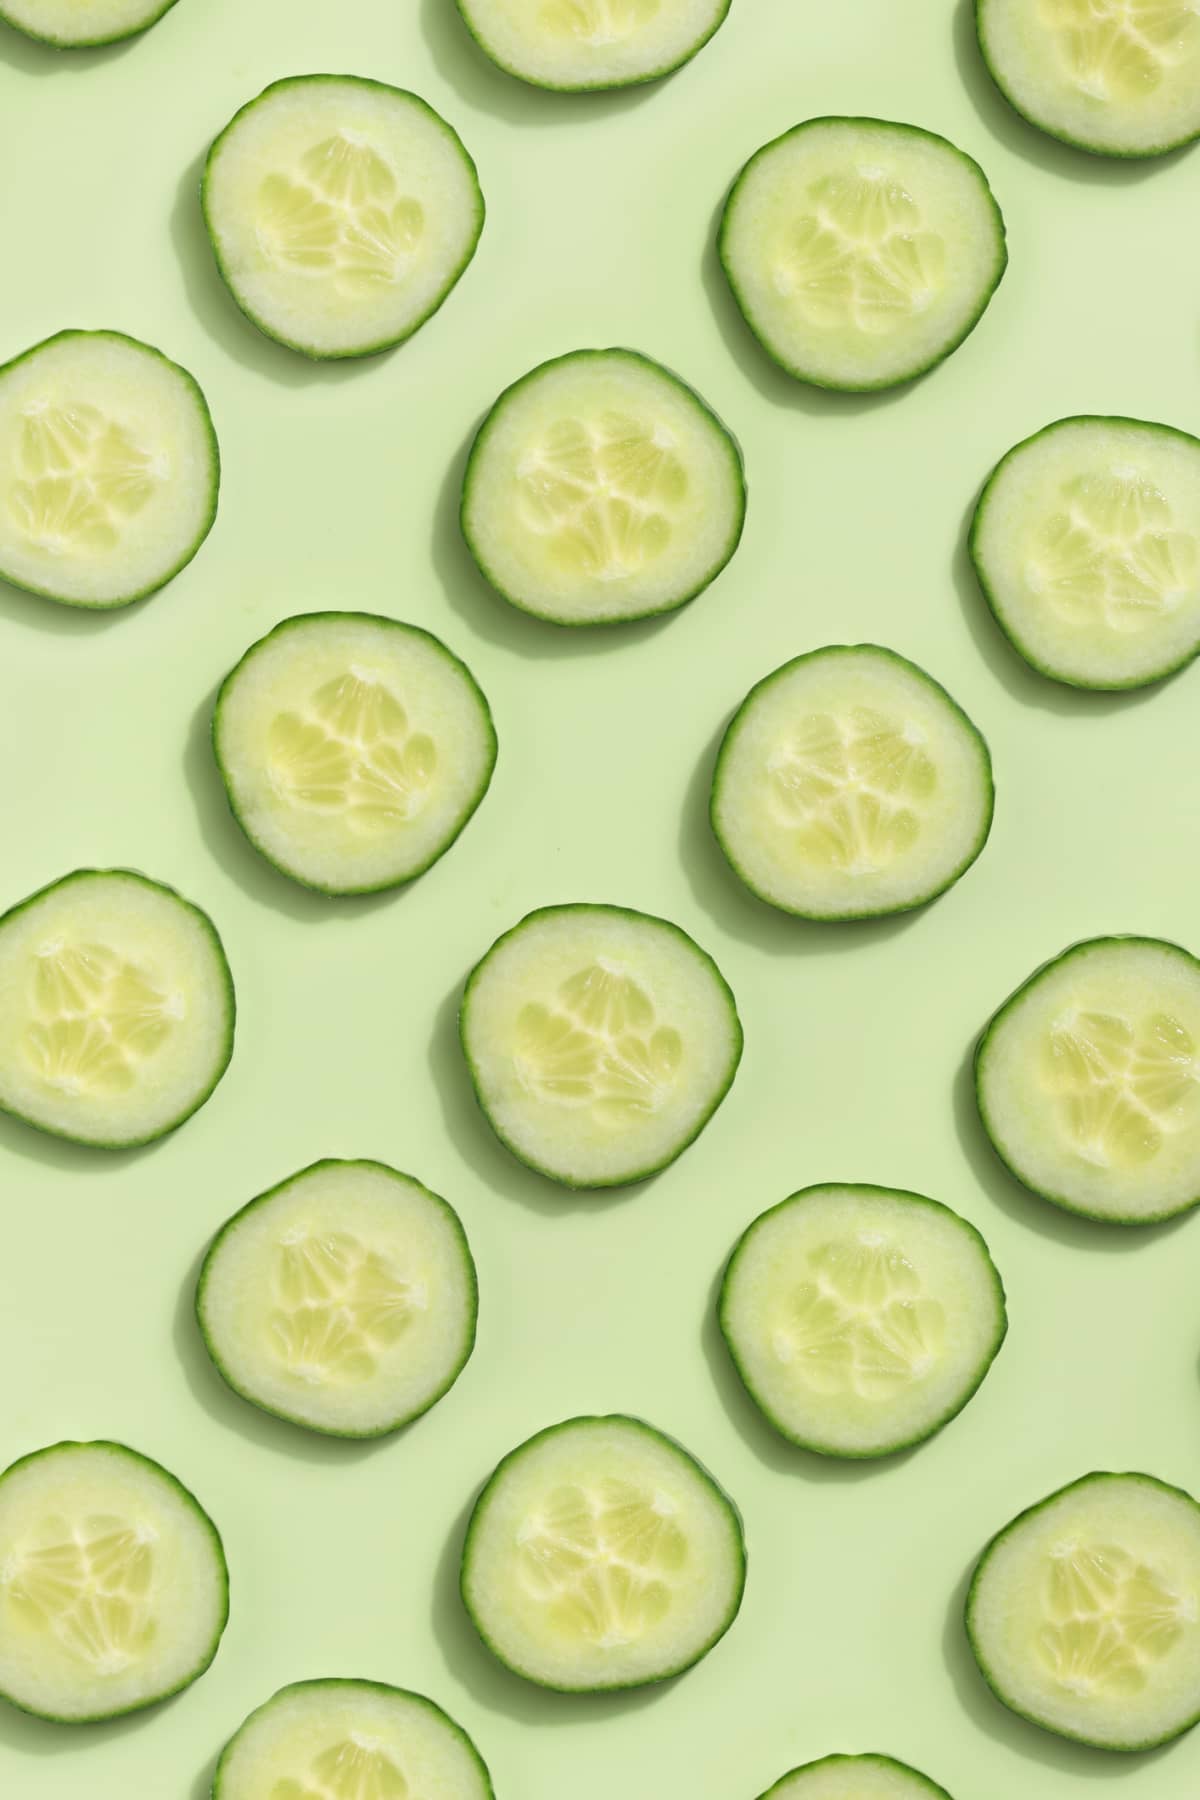 Cucumber rounds on a light green background